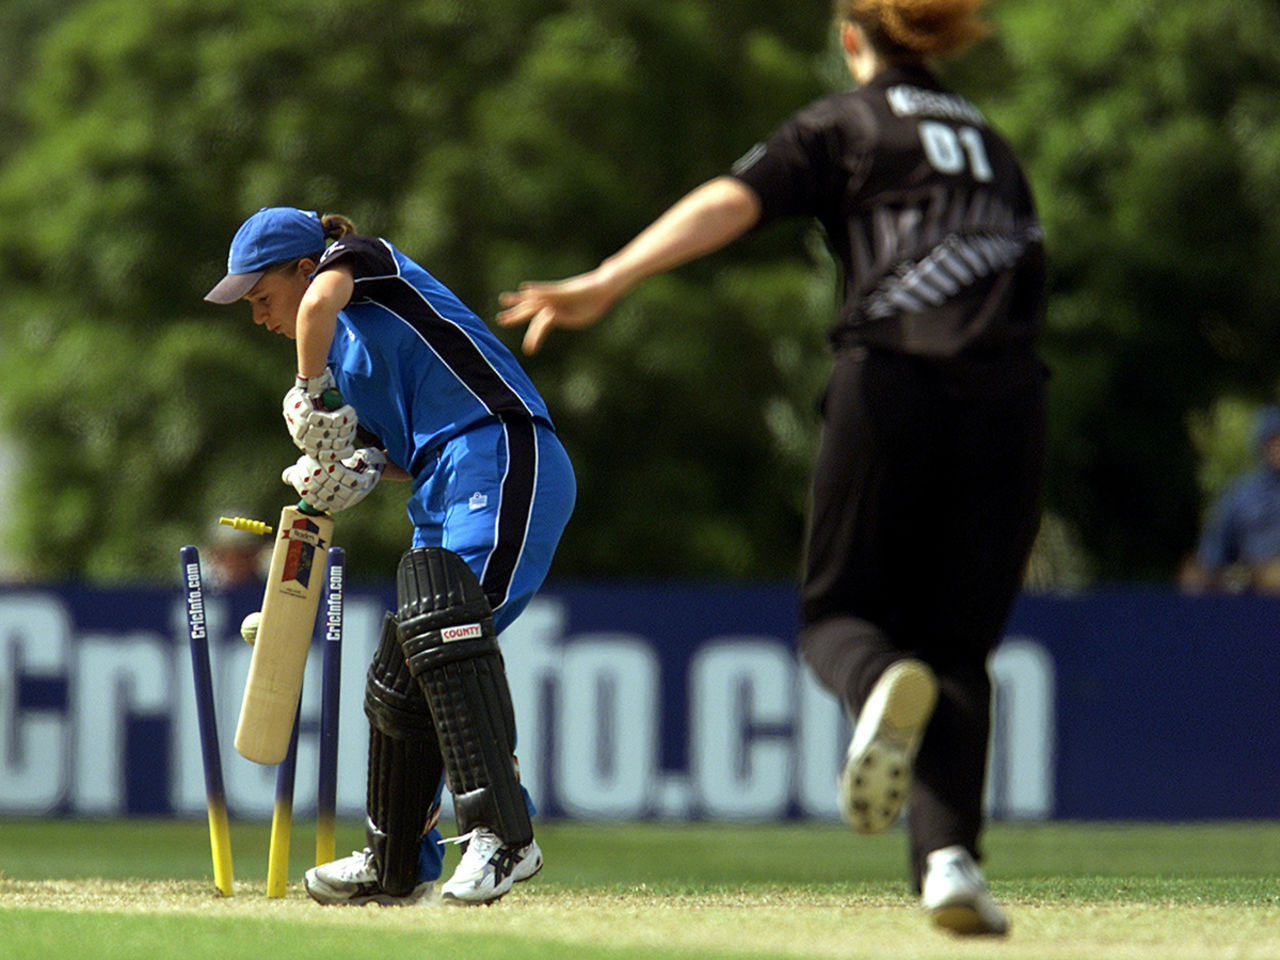 Dawn Holden is bowled by Katrina Keenan for 1, England v New Zealand, CricInfo Women's World Cup, Lincoln, December 14, 2000